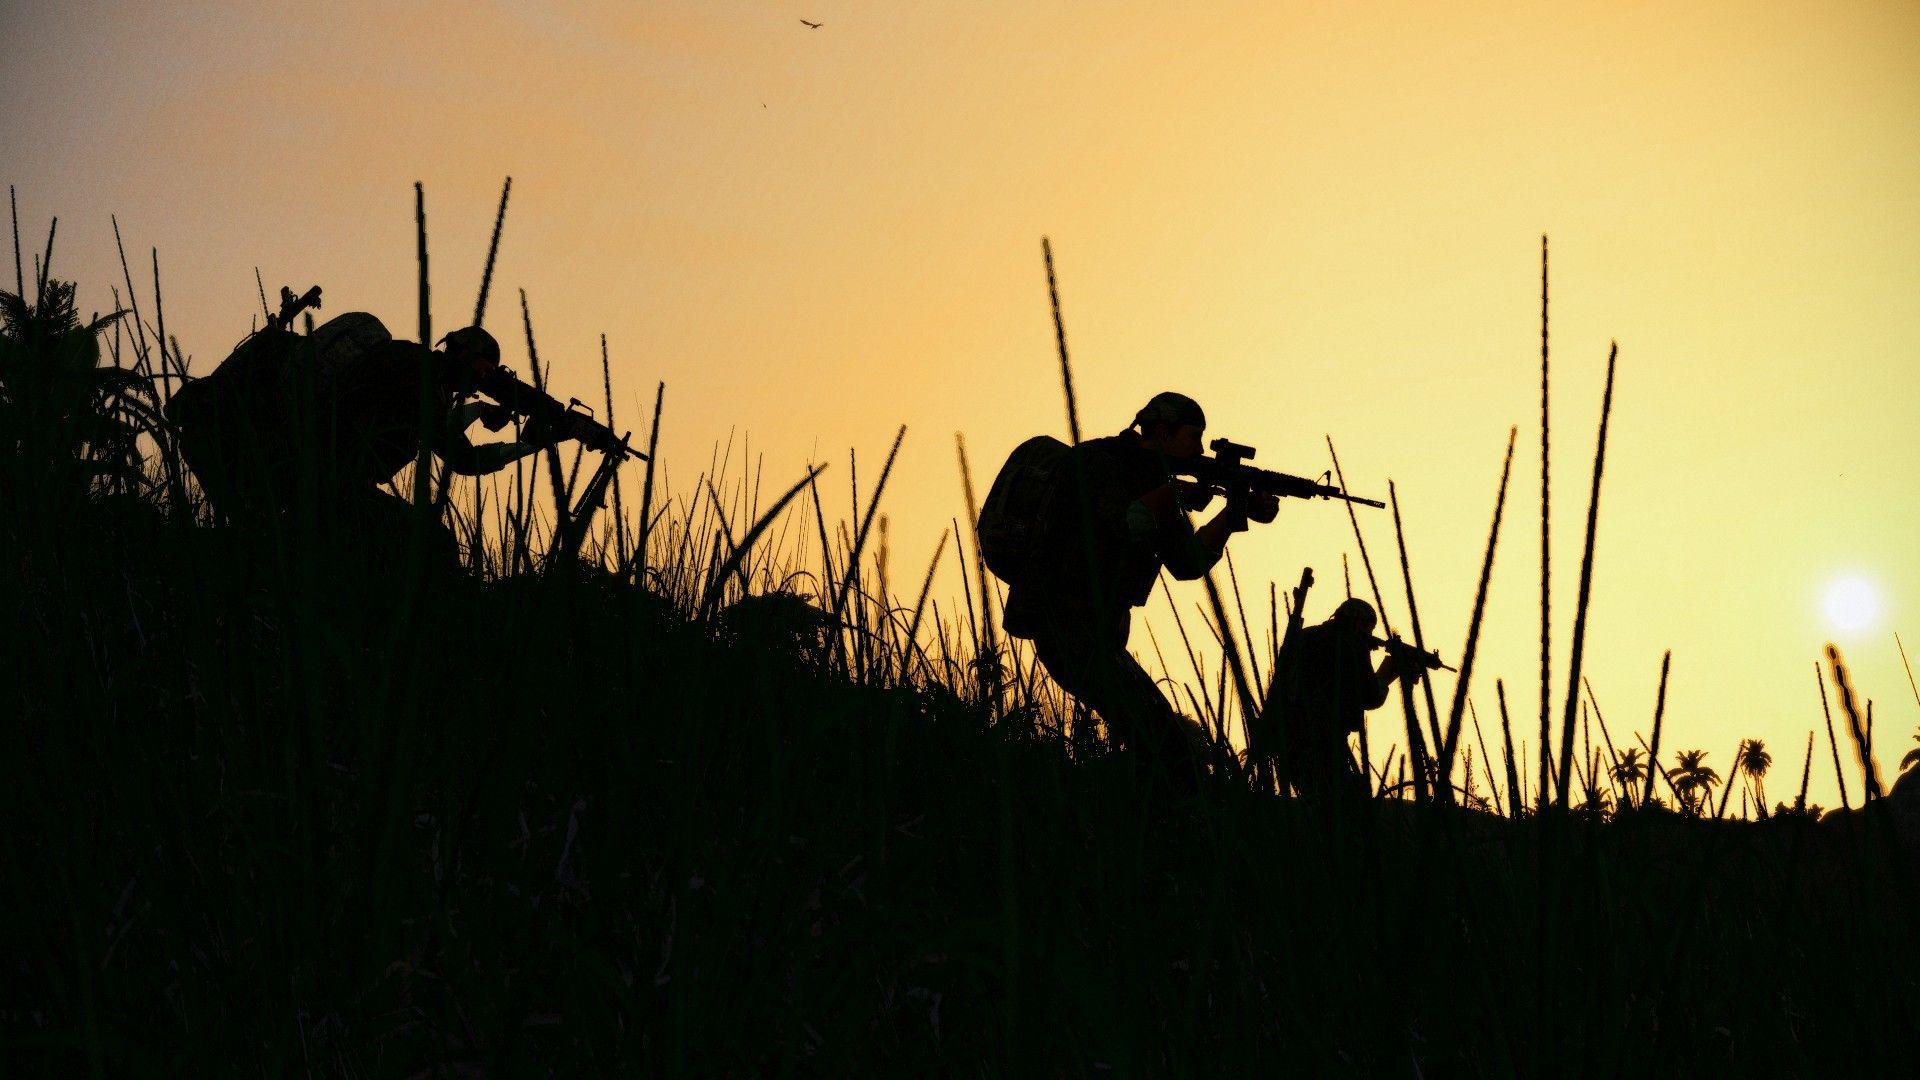 Soldiers military silhouettes wallpaper